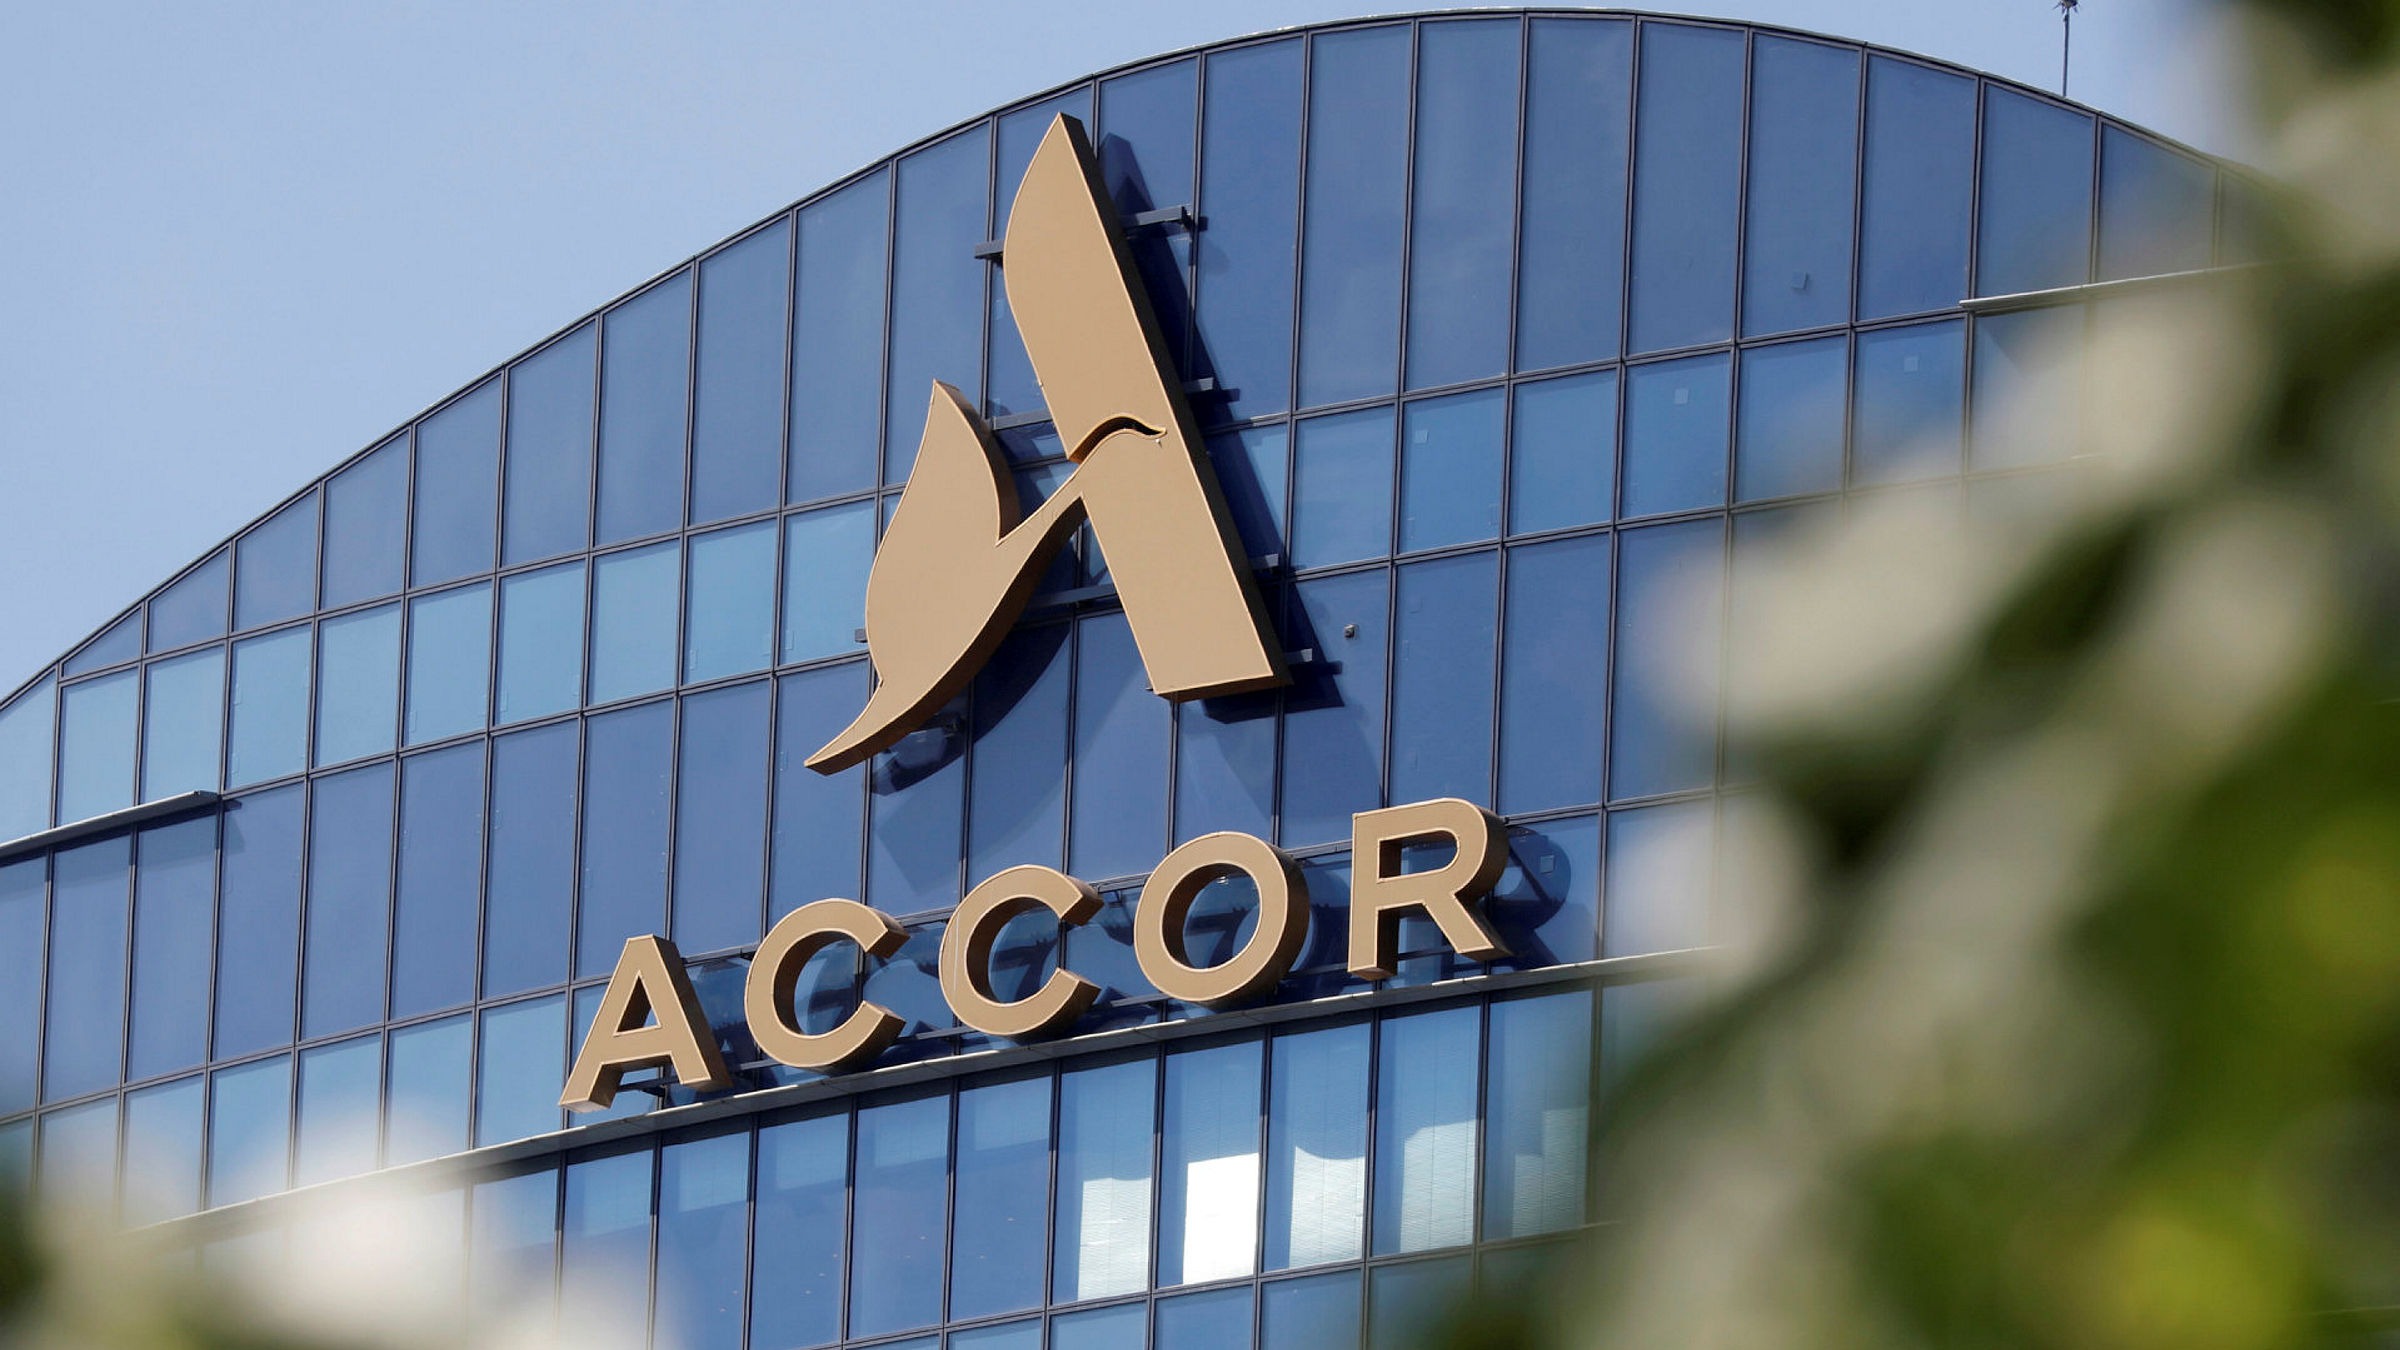 Accor signs deal for two new Novotel properties in Bhopal and Indore